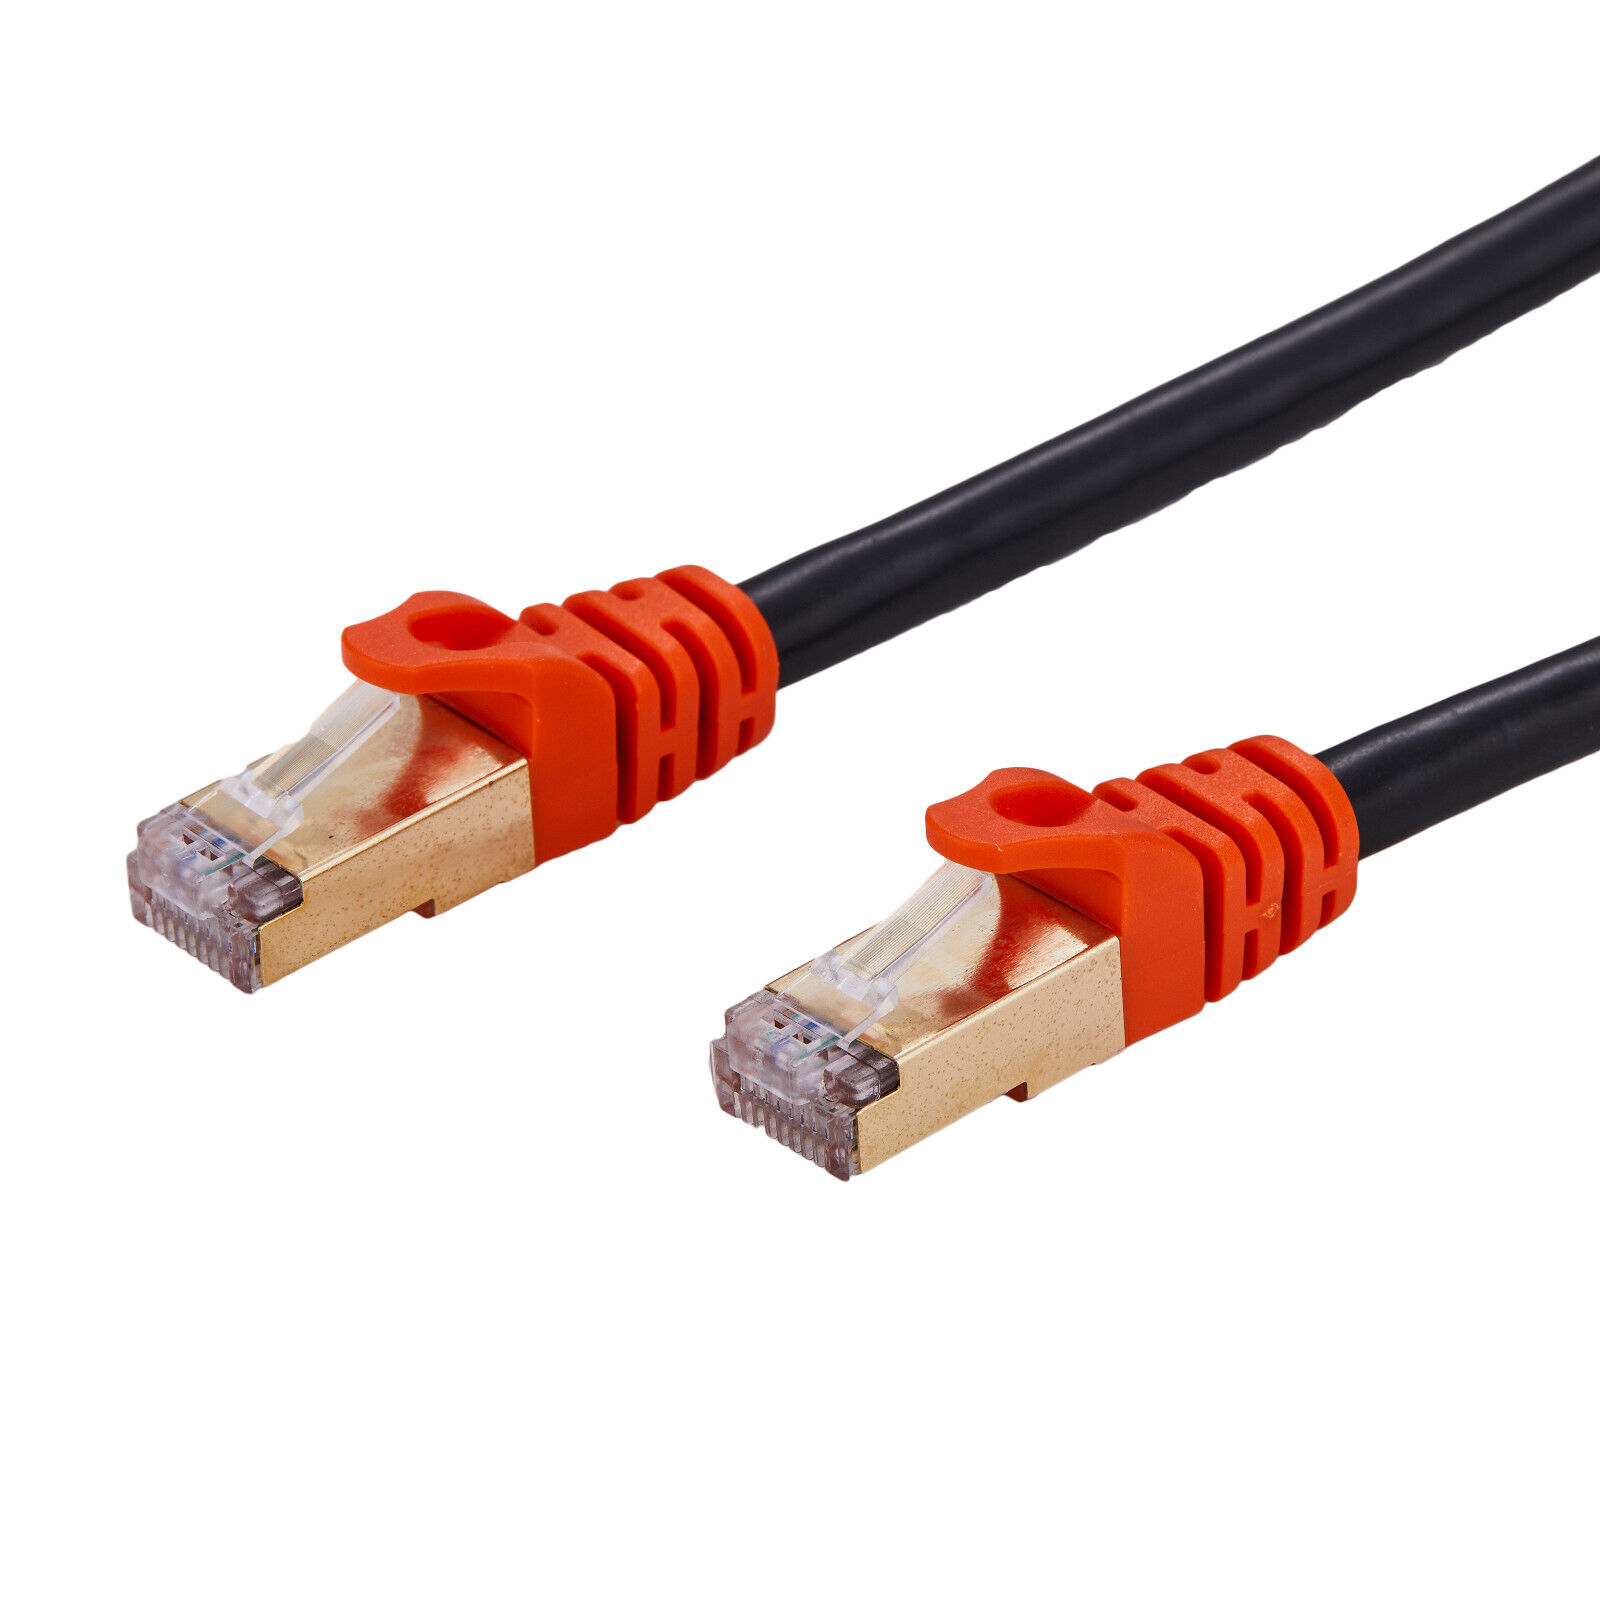 CAT7 Outdoor Ethernet Patch Cable 26AWG Copper SFTP LAN RJ45 Cord 6FT- 200FT Lot